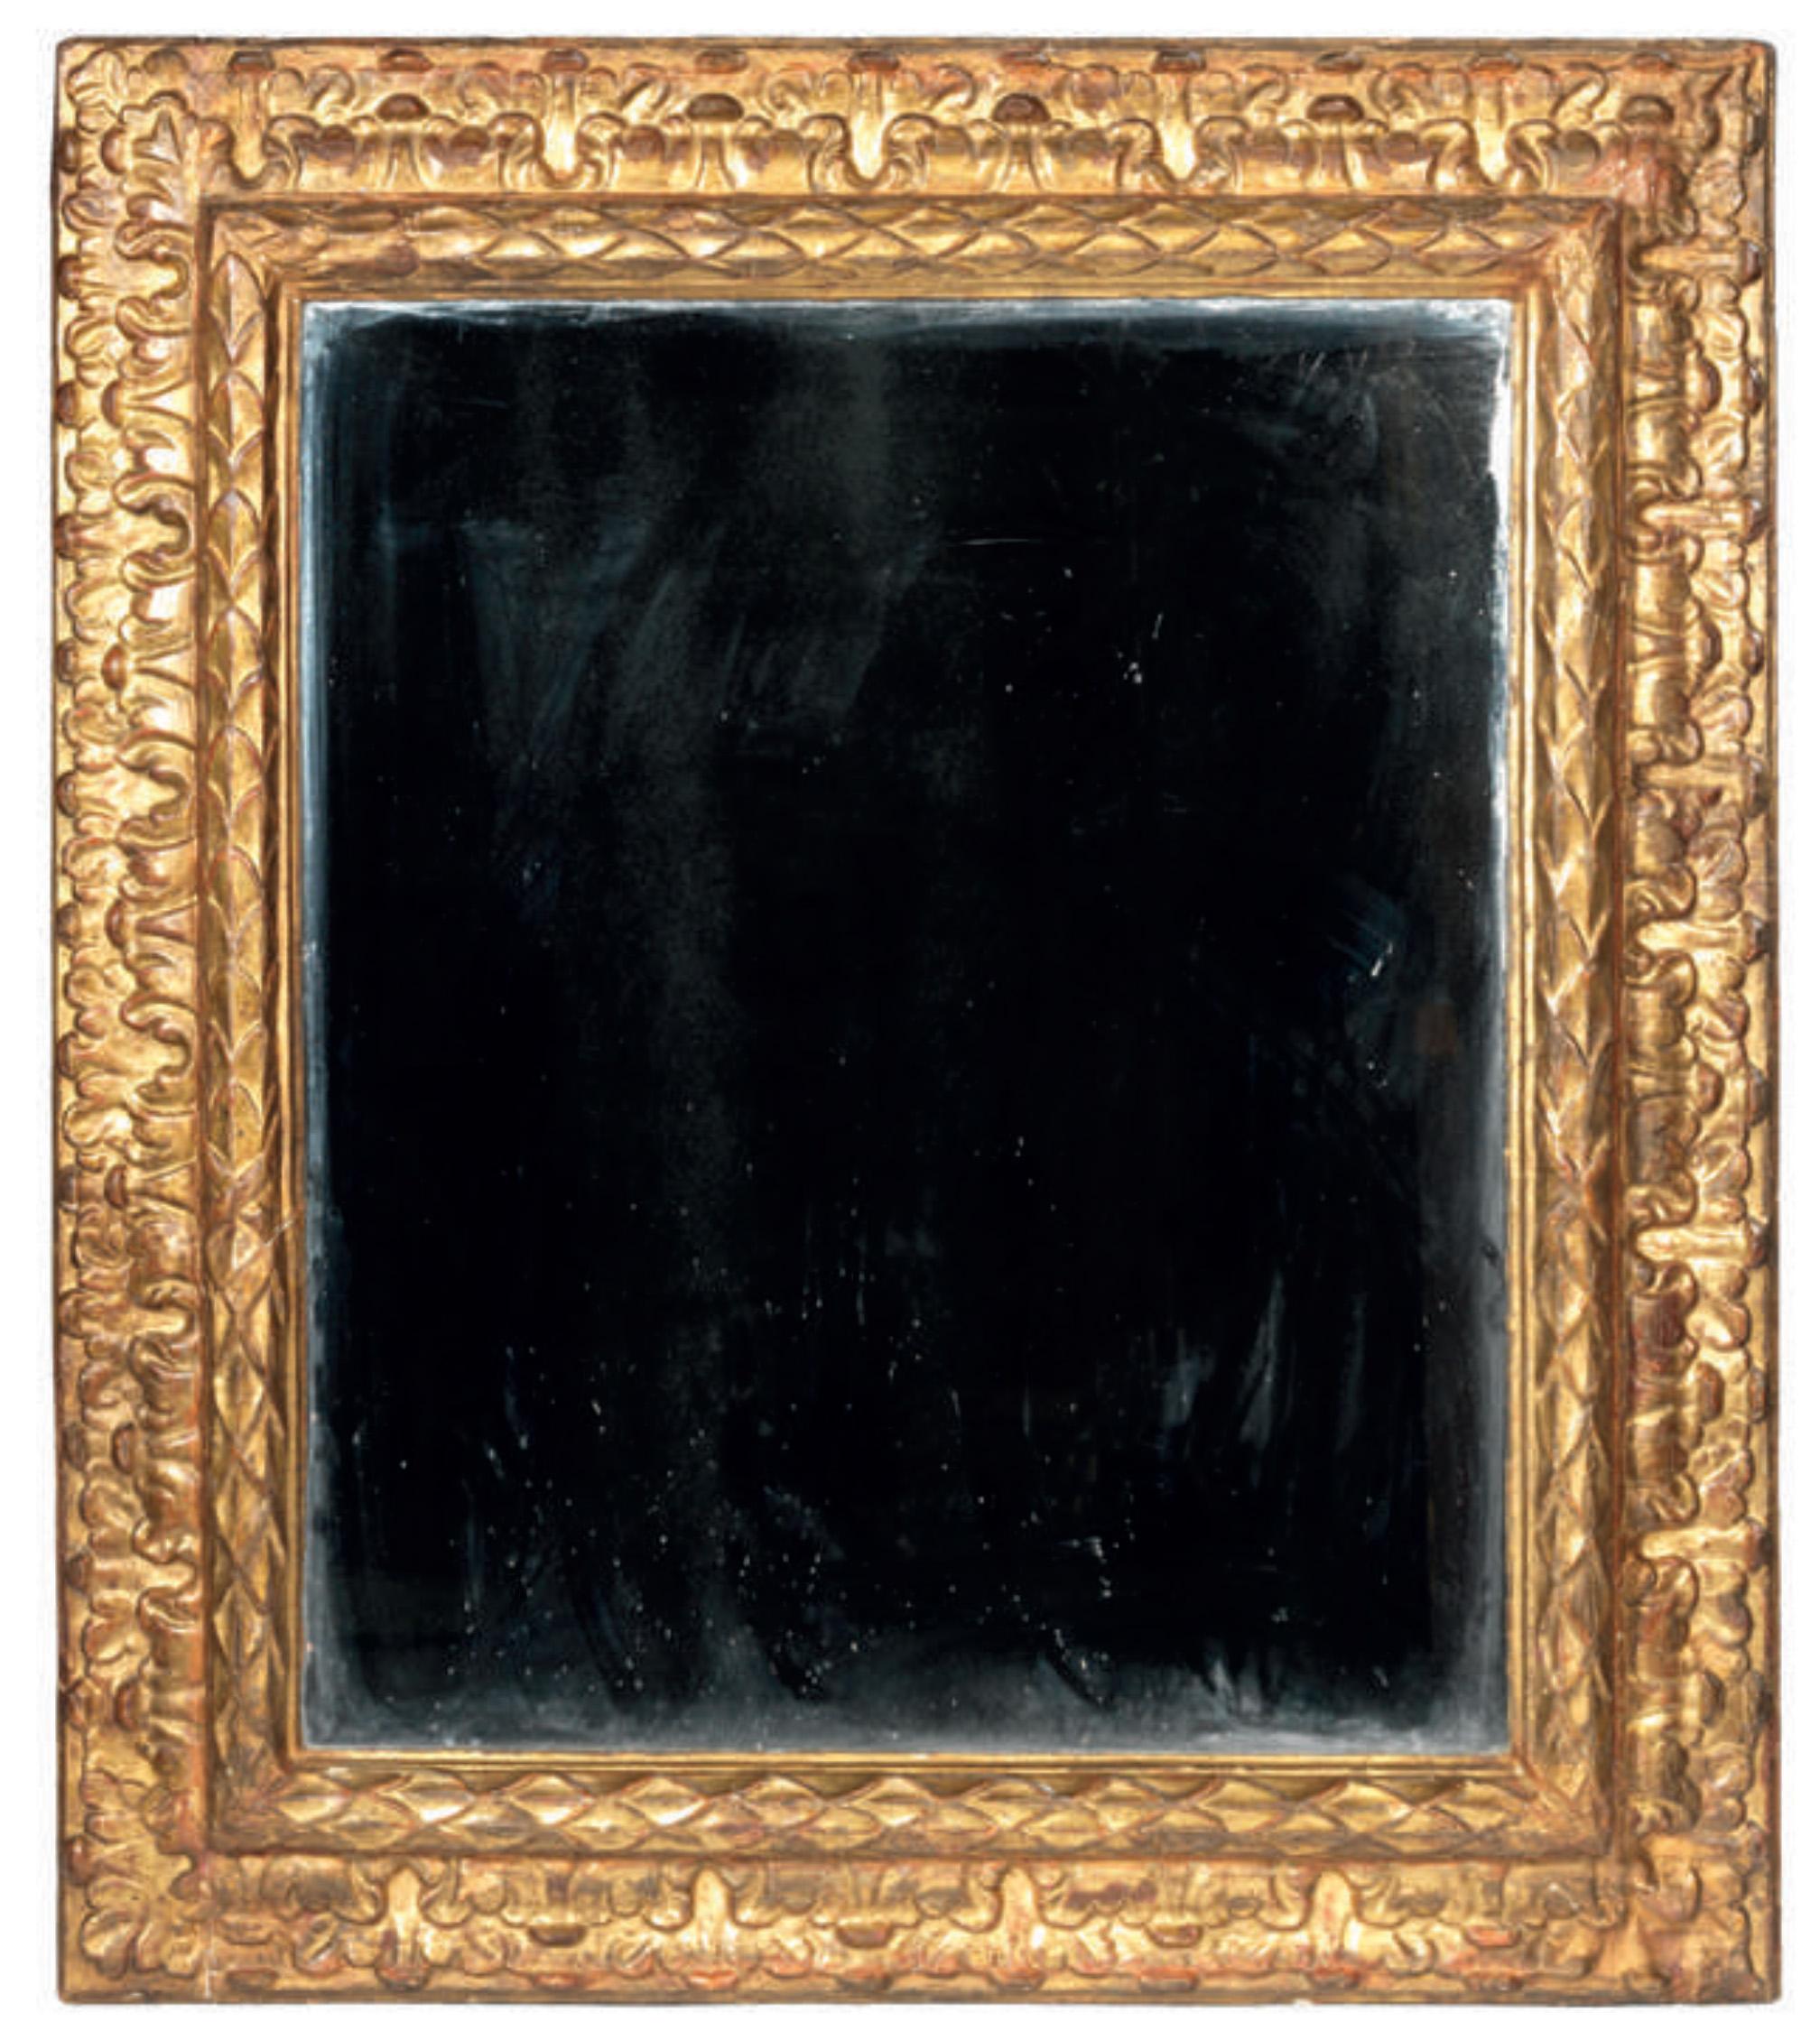 Large carved and gilt wood frame with inverted profile mounted as a miror. The frame is enriched with a laurel leaves and vegetal scroll decor.